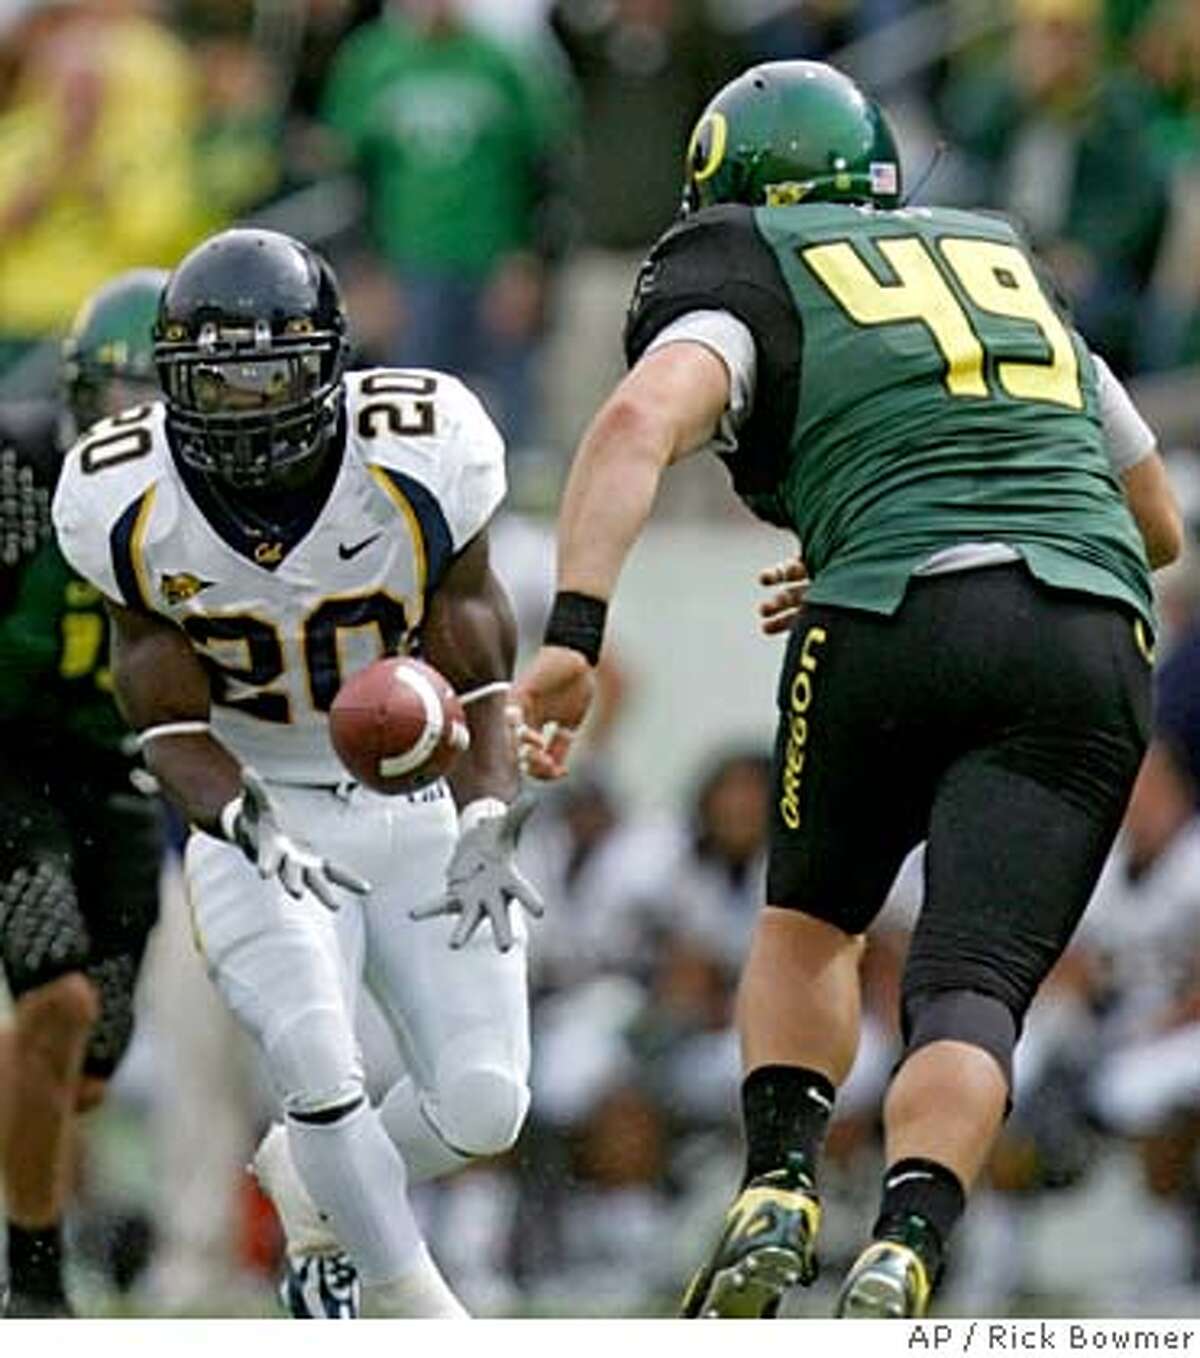 California's Justin Forsett (20) catches a pass as Oregon's Nick Reed (49) looks on in the second quarter of a football game Saturday, Sept. 29, 2007, in Eugene, Ore. (AP Photo/Rick Bowmer)